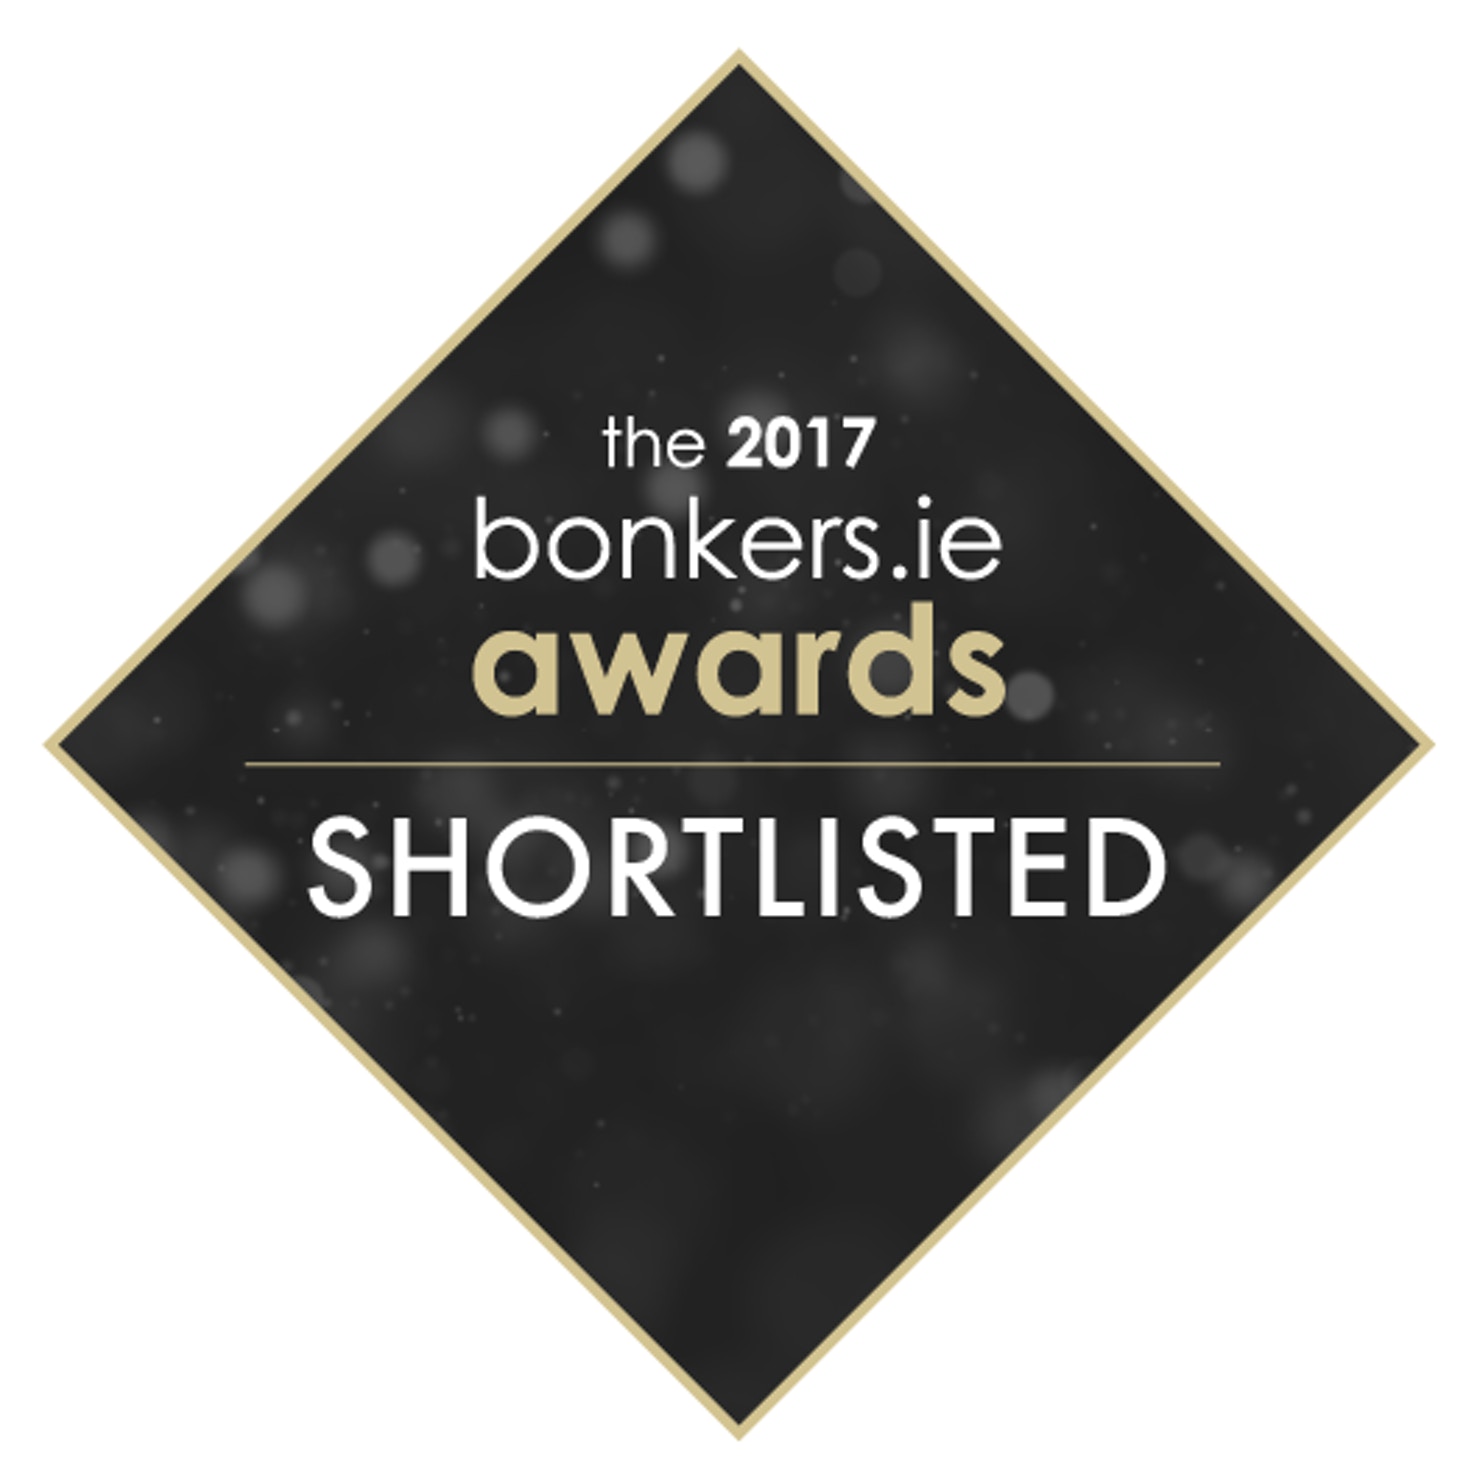 Pinergy are so proud to win 2017 Bonkers.ie Awards ‘Best Innovation in Energy’